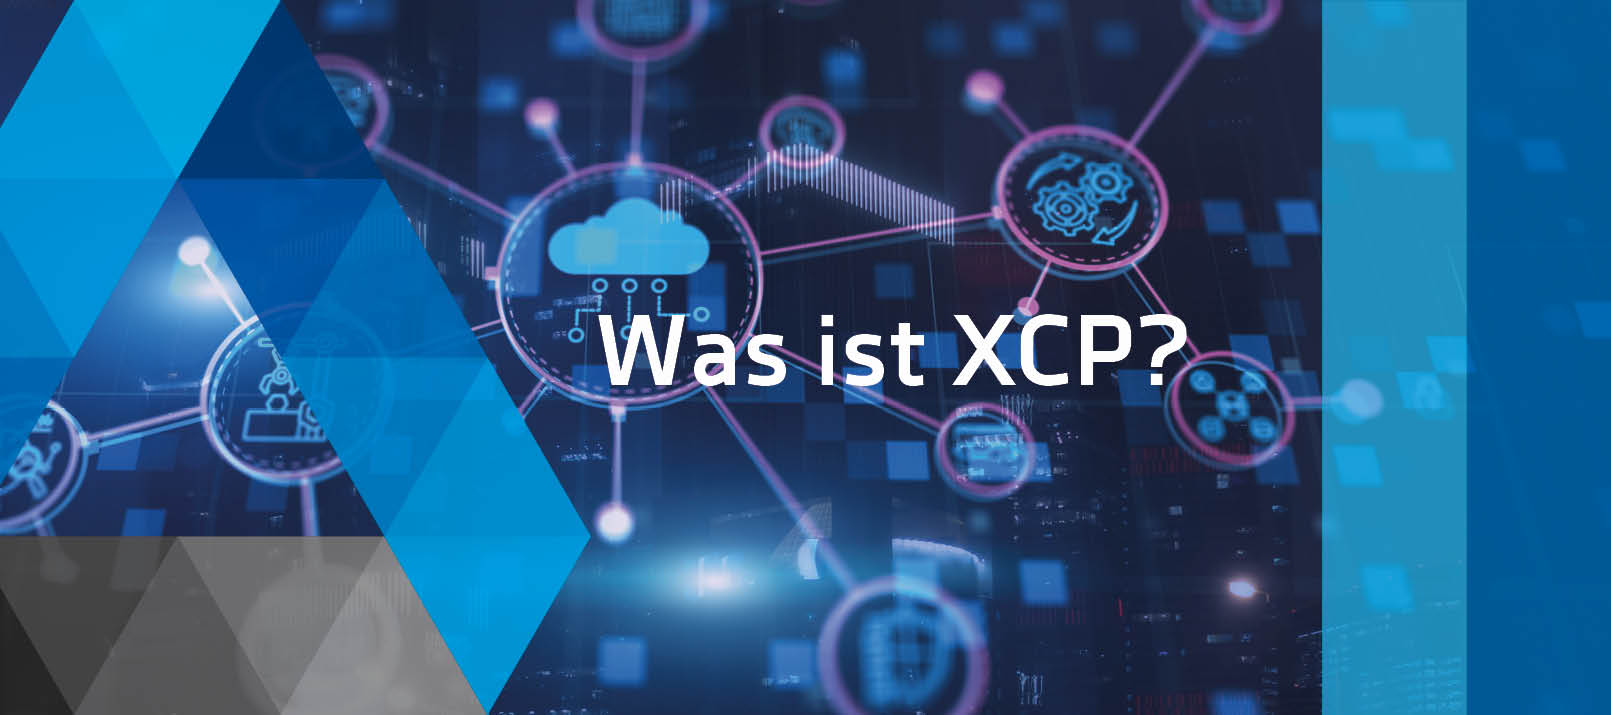 Was ist XCP?